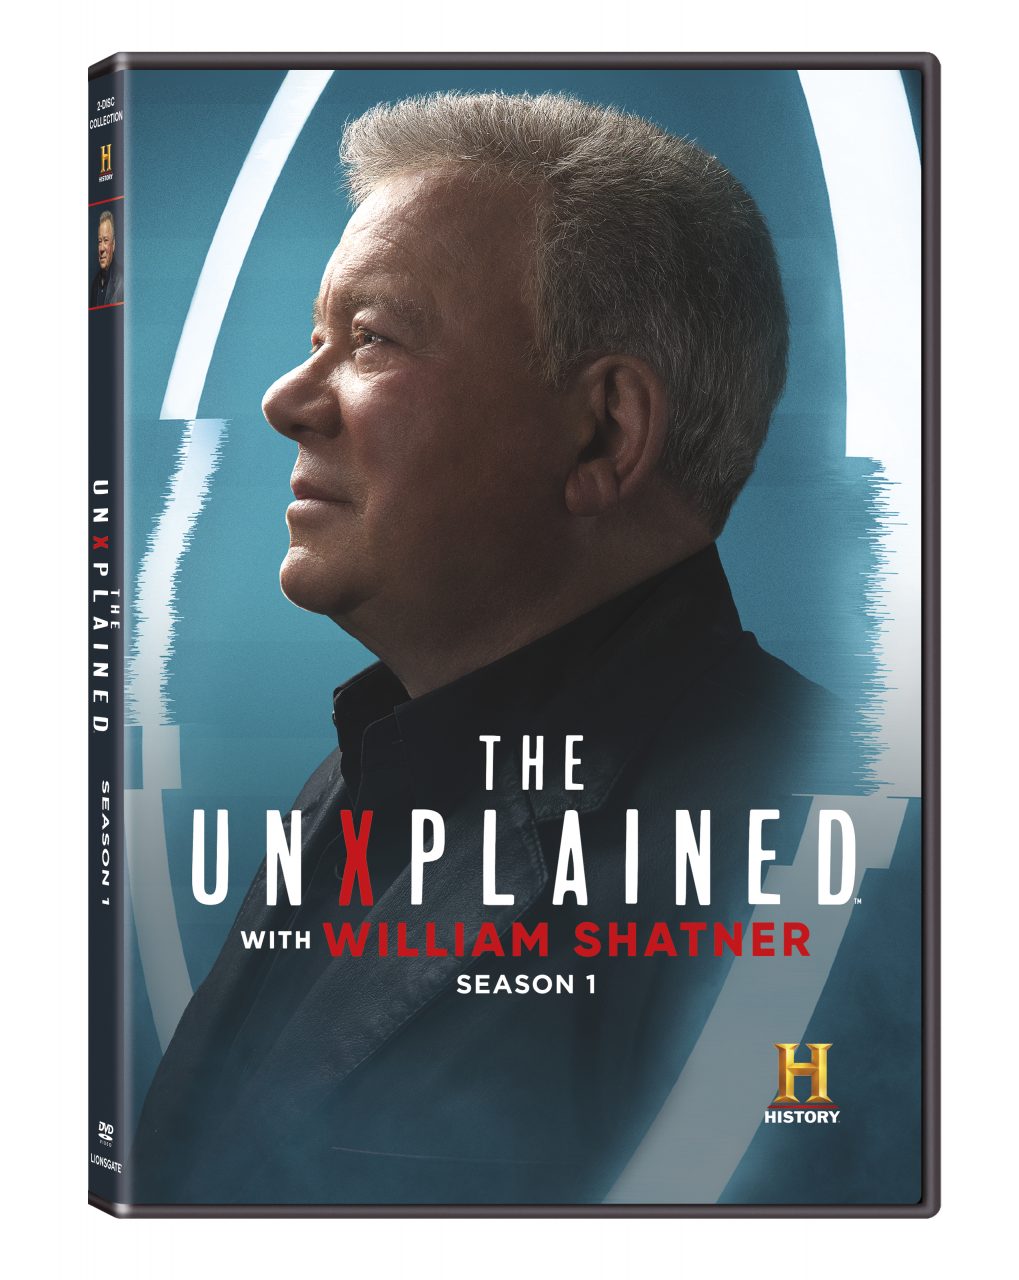 The Unxplained with William Shatner DVD cover (Lionsgate Home Entertainment)